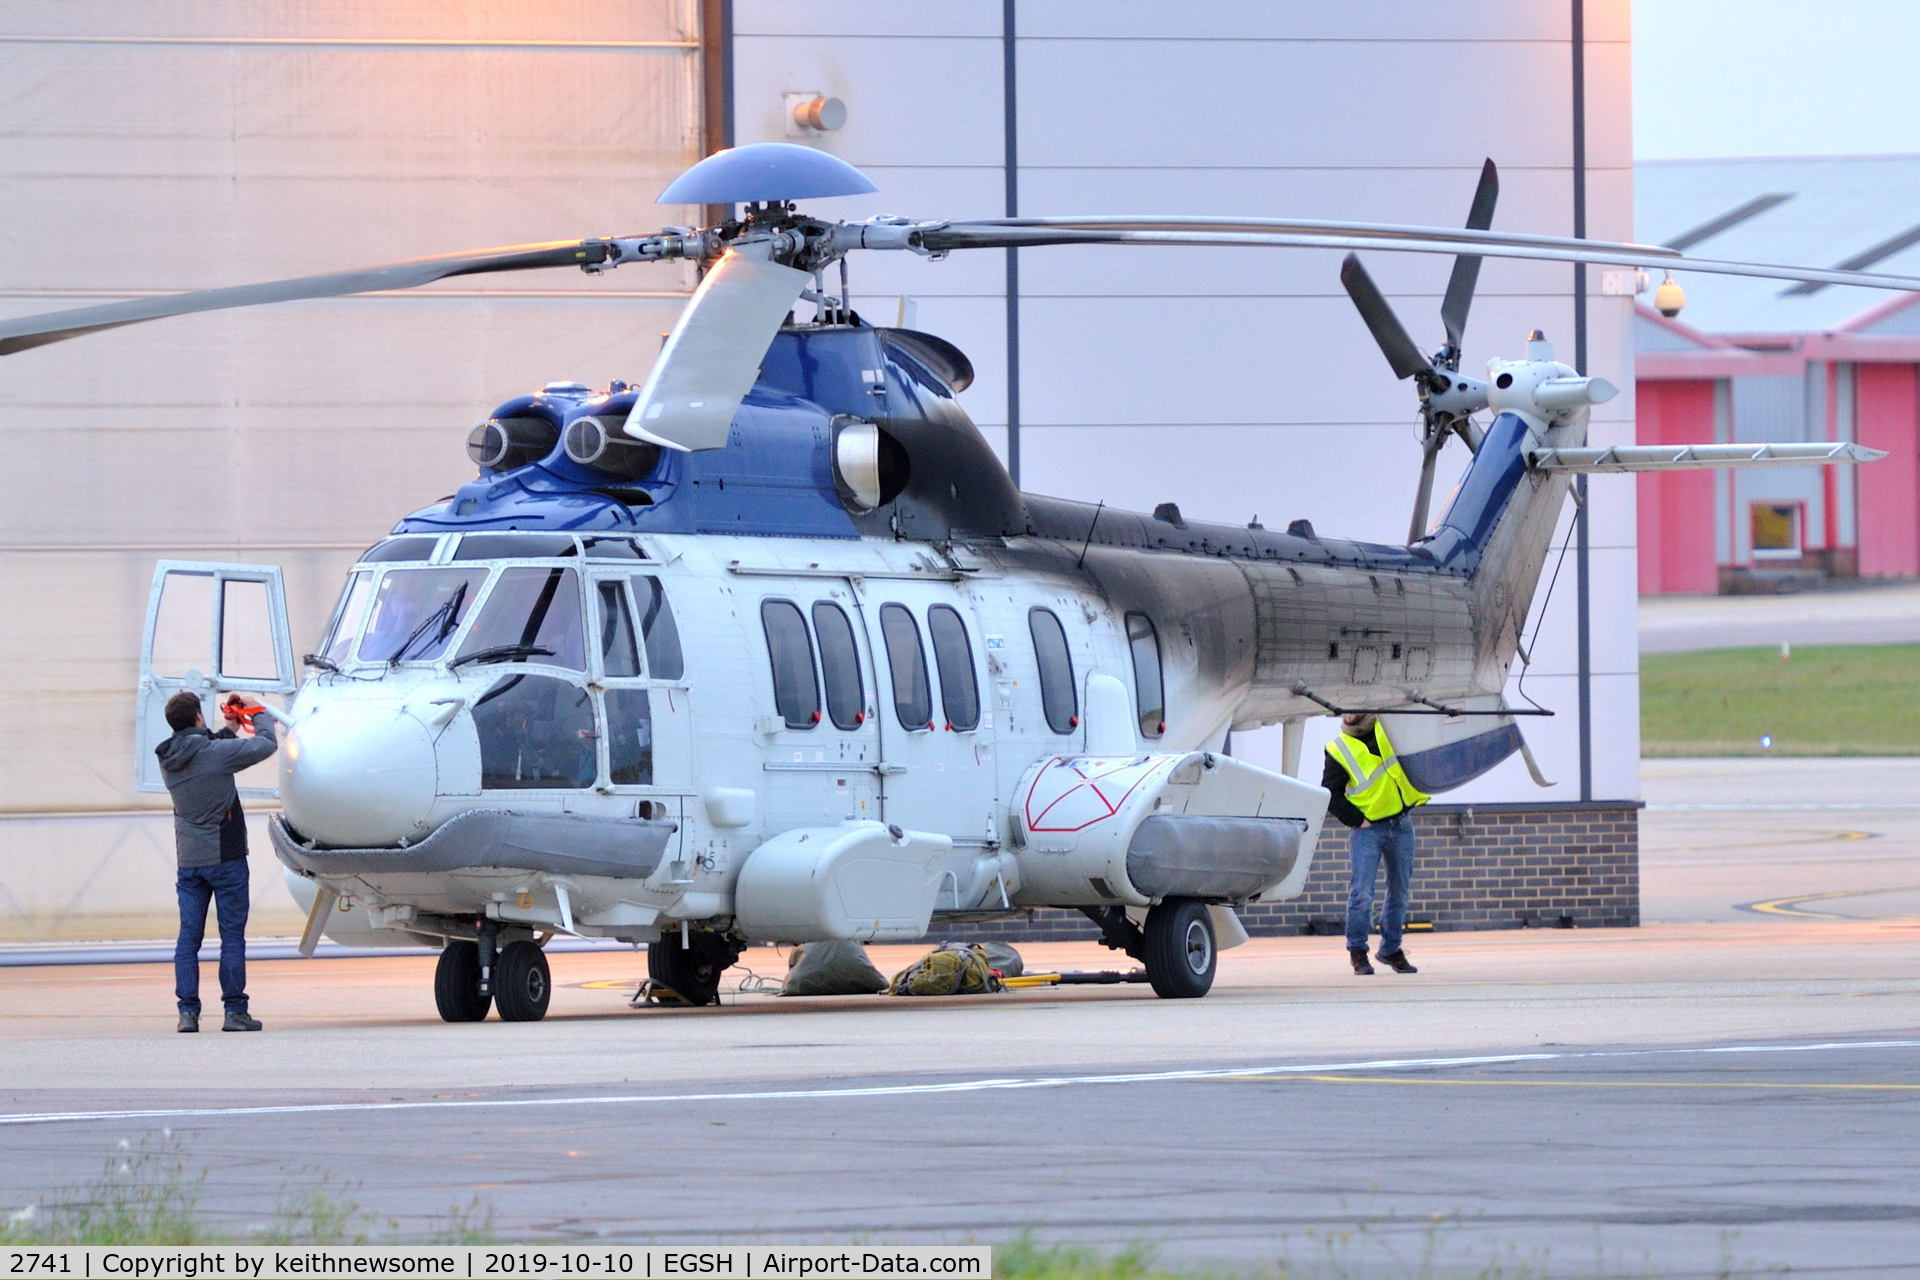 2741, Eurocopter EC-225LP Super Puma Mk2+ C/N 2741, I/D not guaranteed SY code on port side ?
At Norwich this evening.